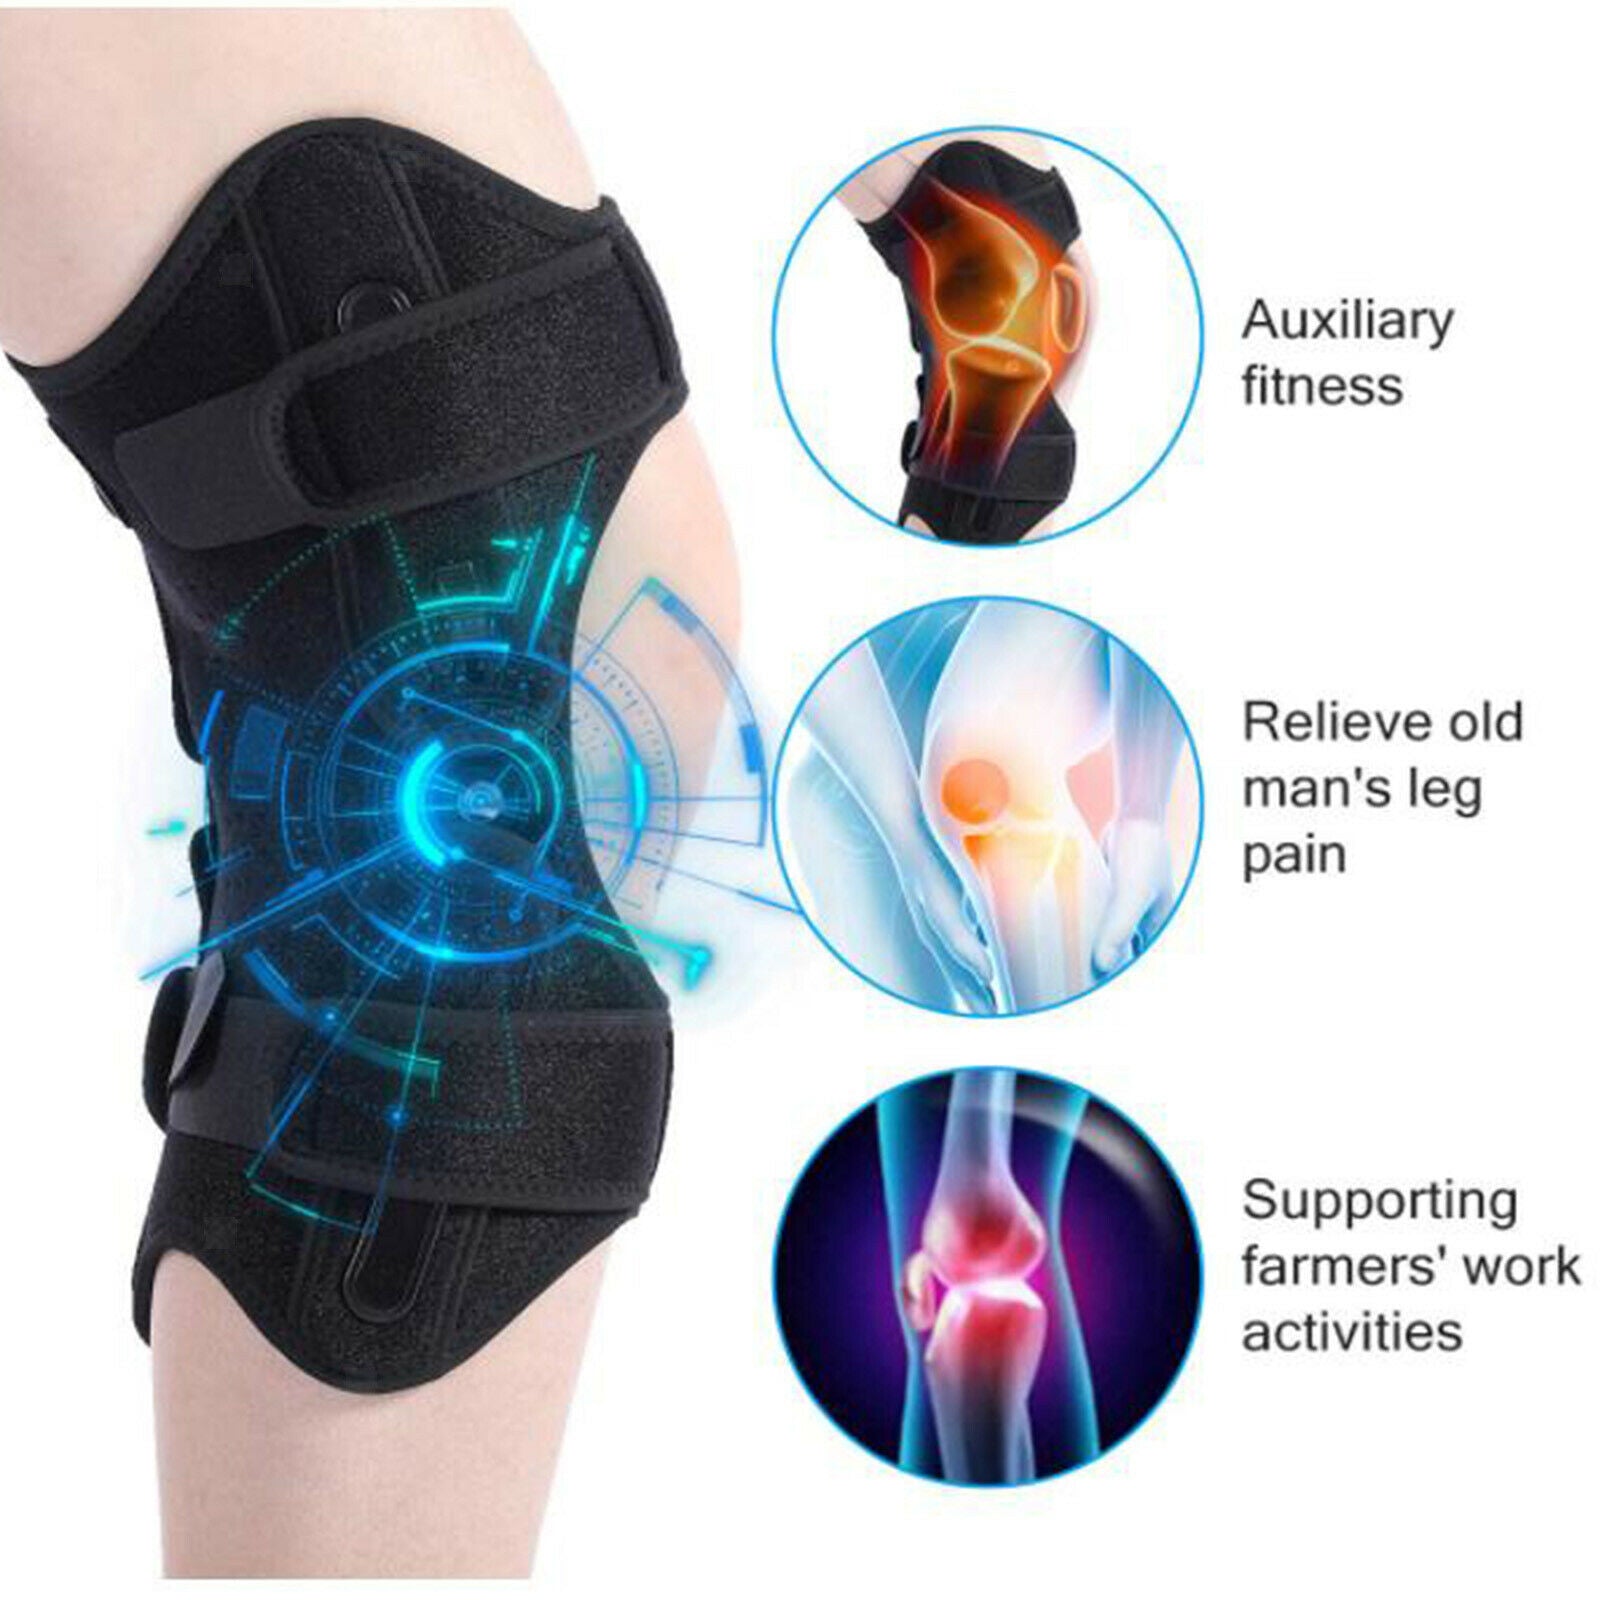 2x Knee Protection Booster Leg Joint Knee Sleeve Support for Climbing Black